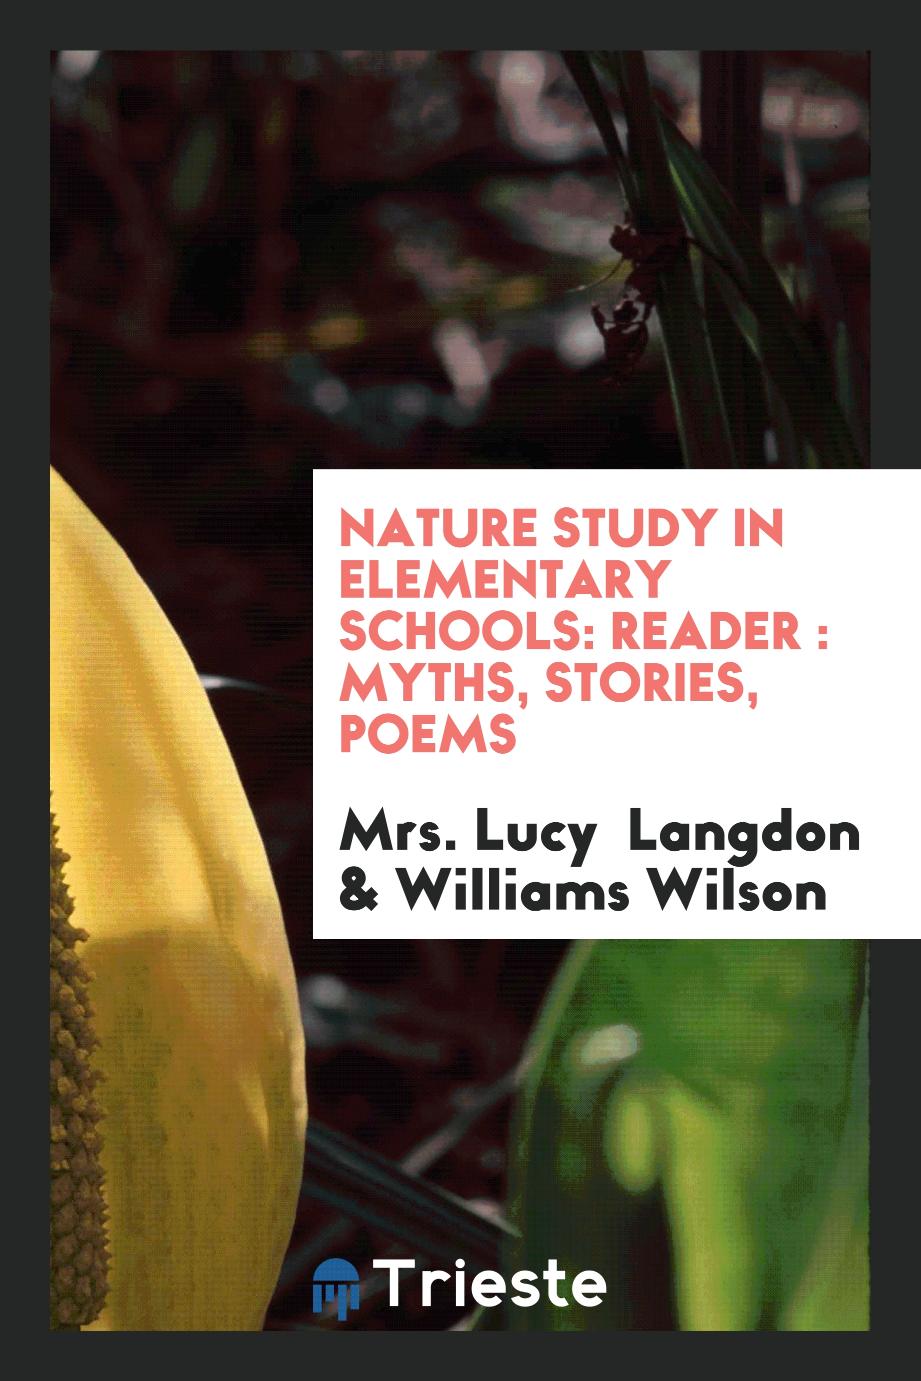 Nature Study in Elementary Schools: Reader : Myths, Stories, Poems